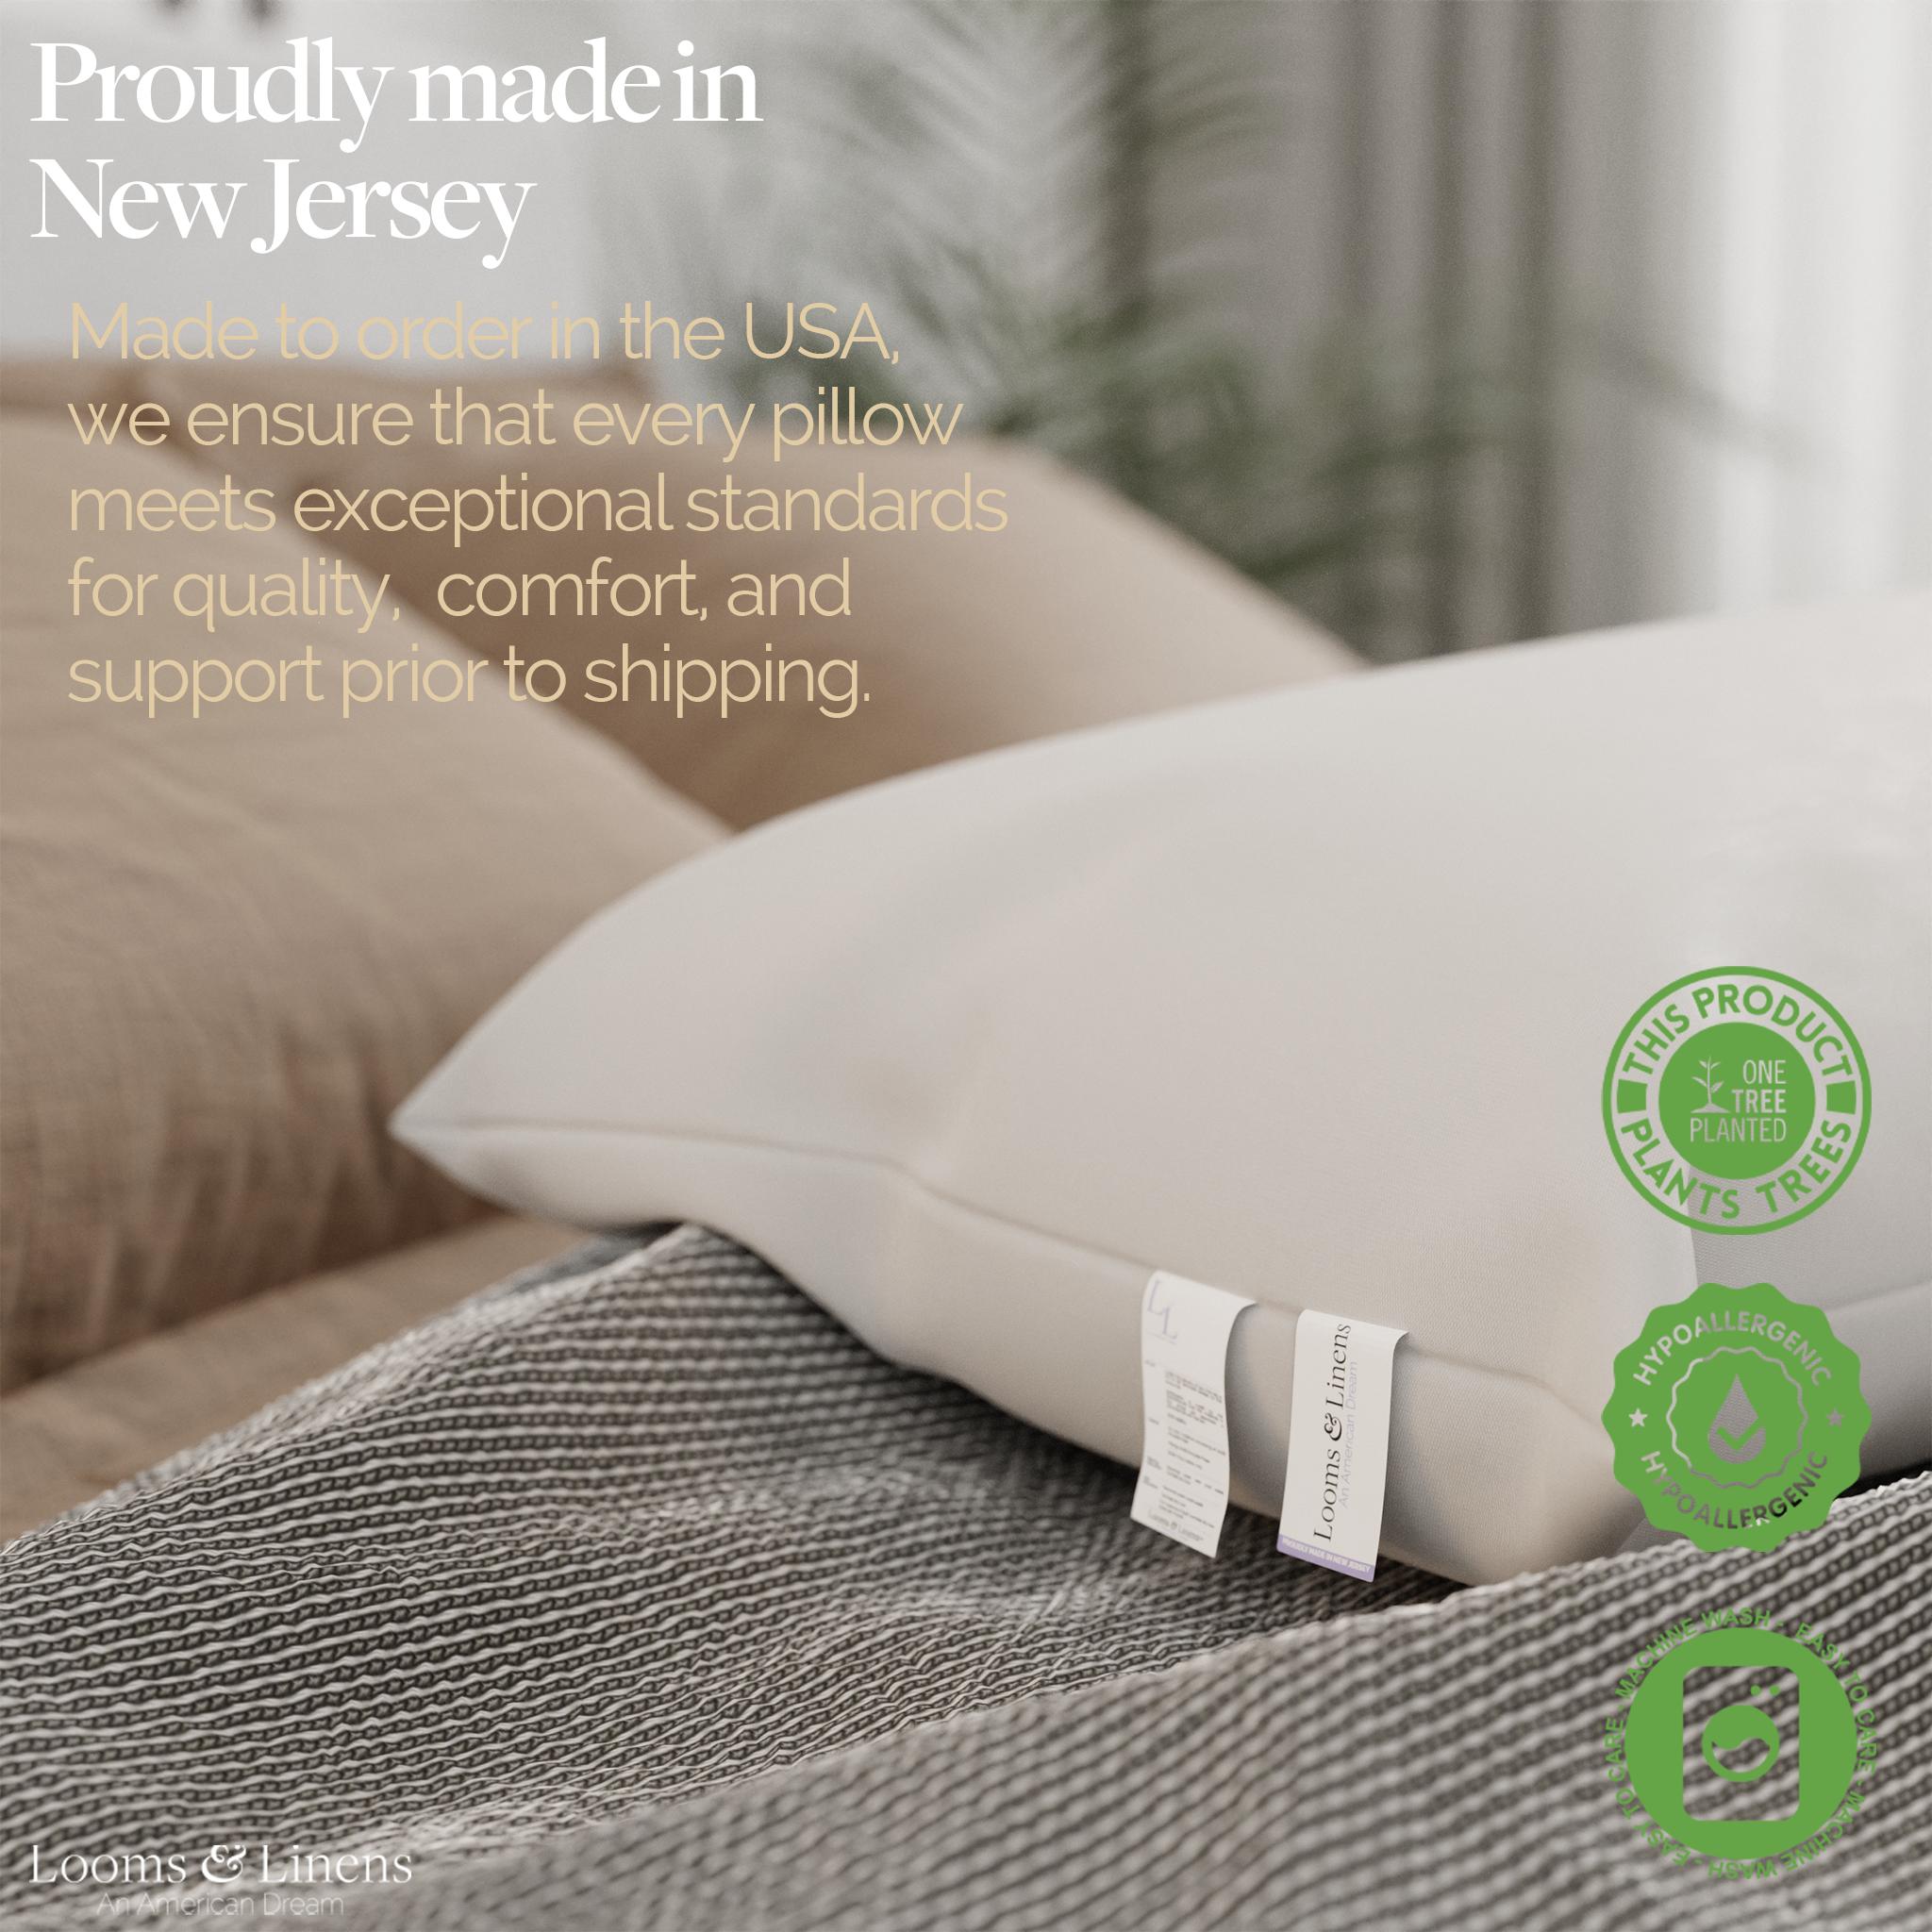 Looms & Linens Full Body Pillow for Adults Elderly and Pregnant Woman Down Alternative Plush Filling - Long Pillow Posture and Spine Support for Rem Sleep Pillow Medium 20 x 54 inch 1 Pack